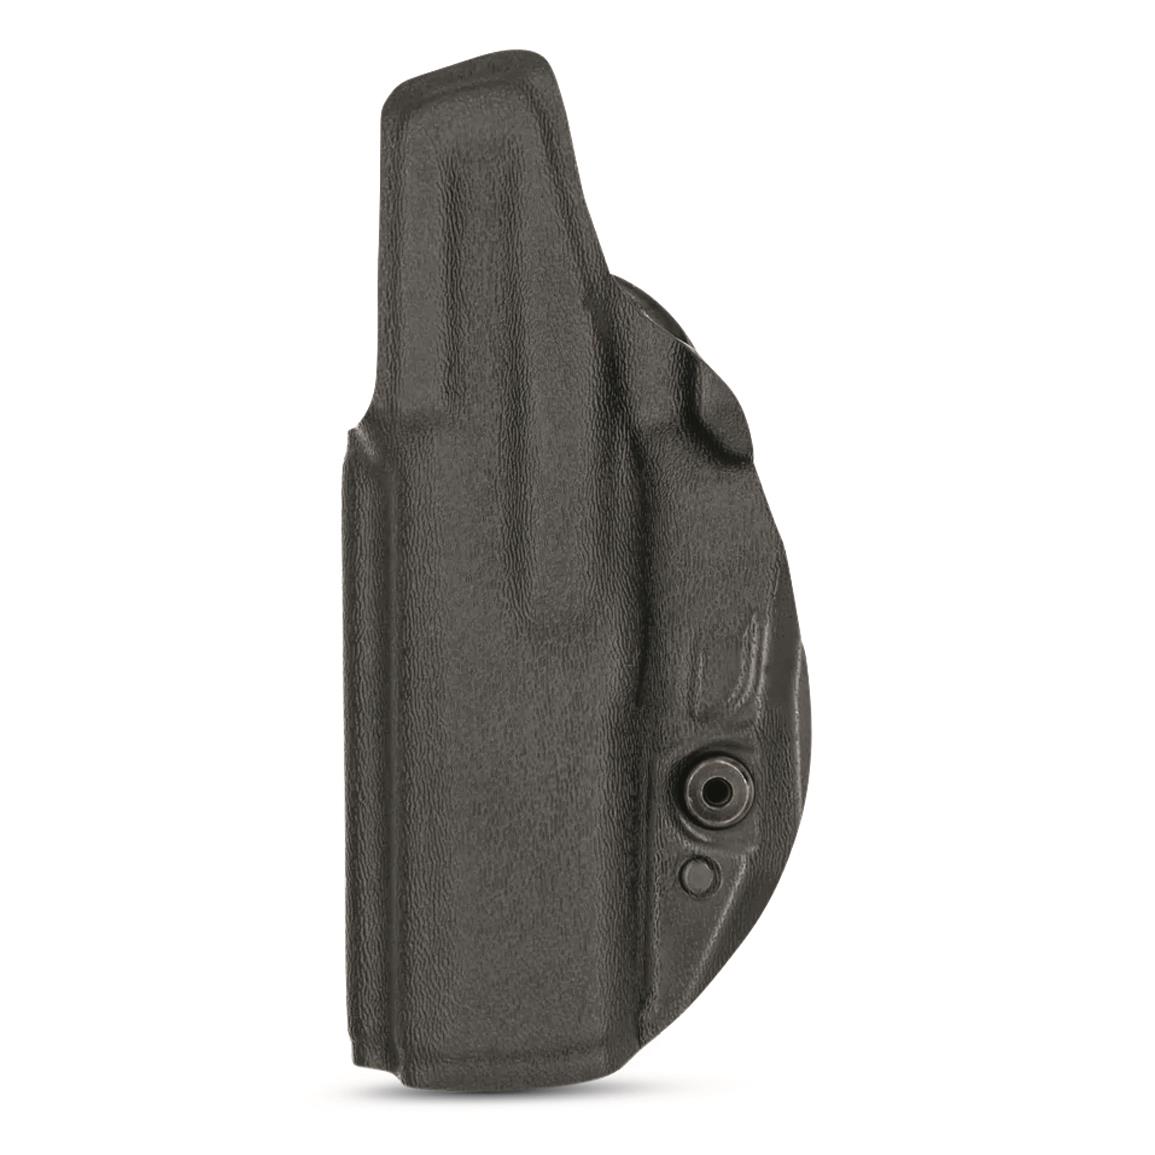 Safariland Species IWB Holster, Smith & Wesson M&P9 Shield Plus, Black, Right Hand